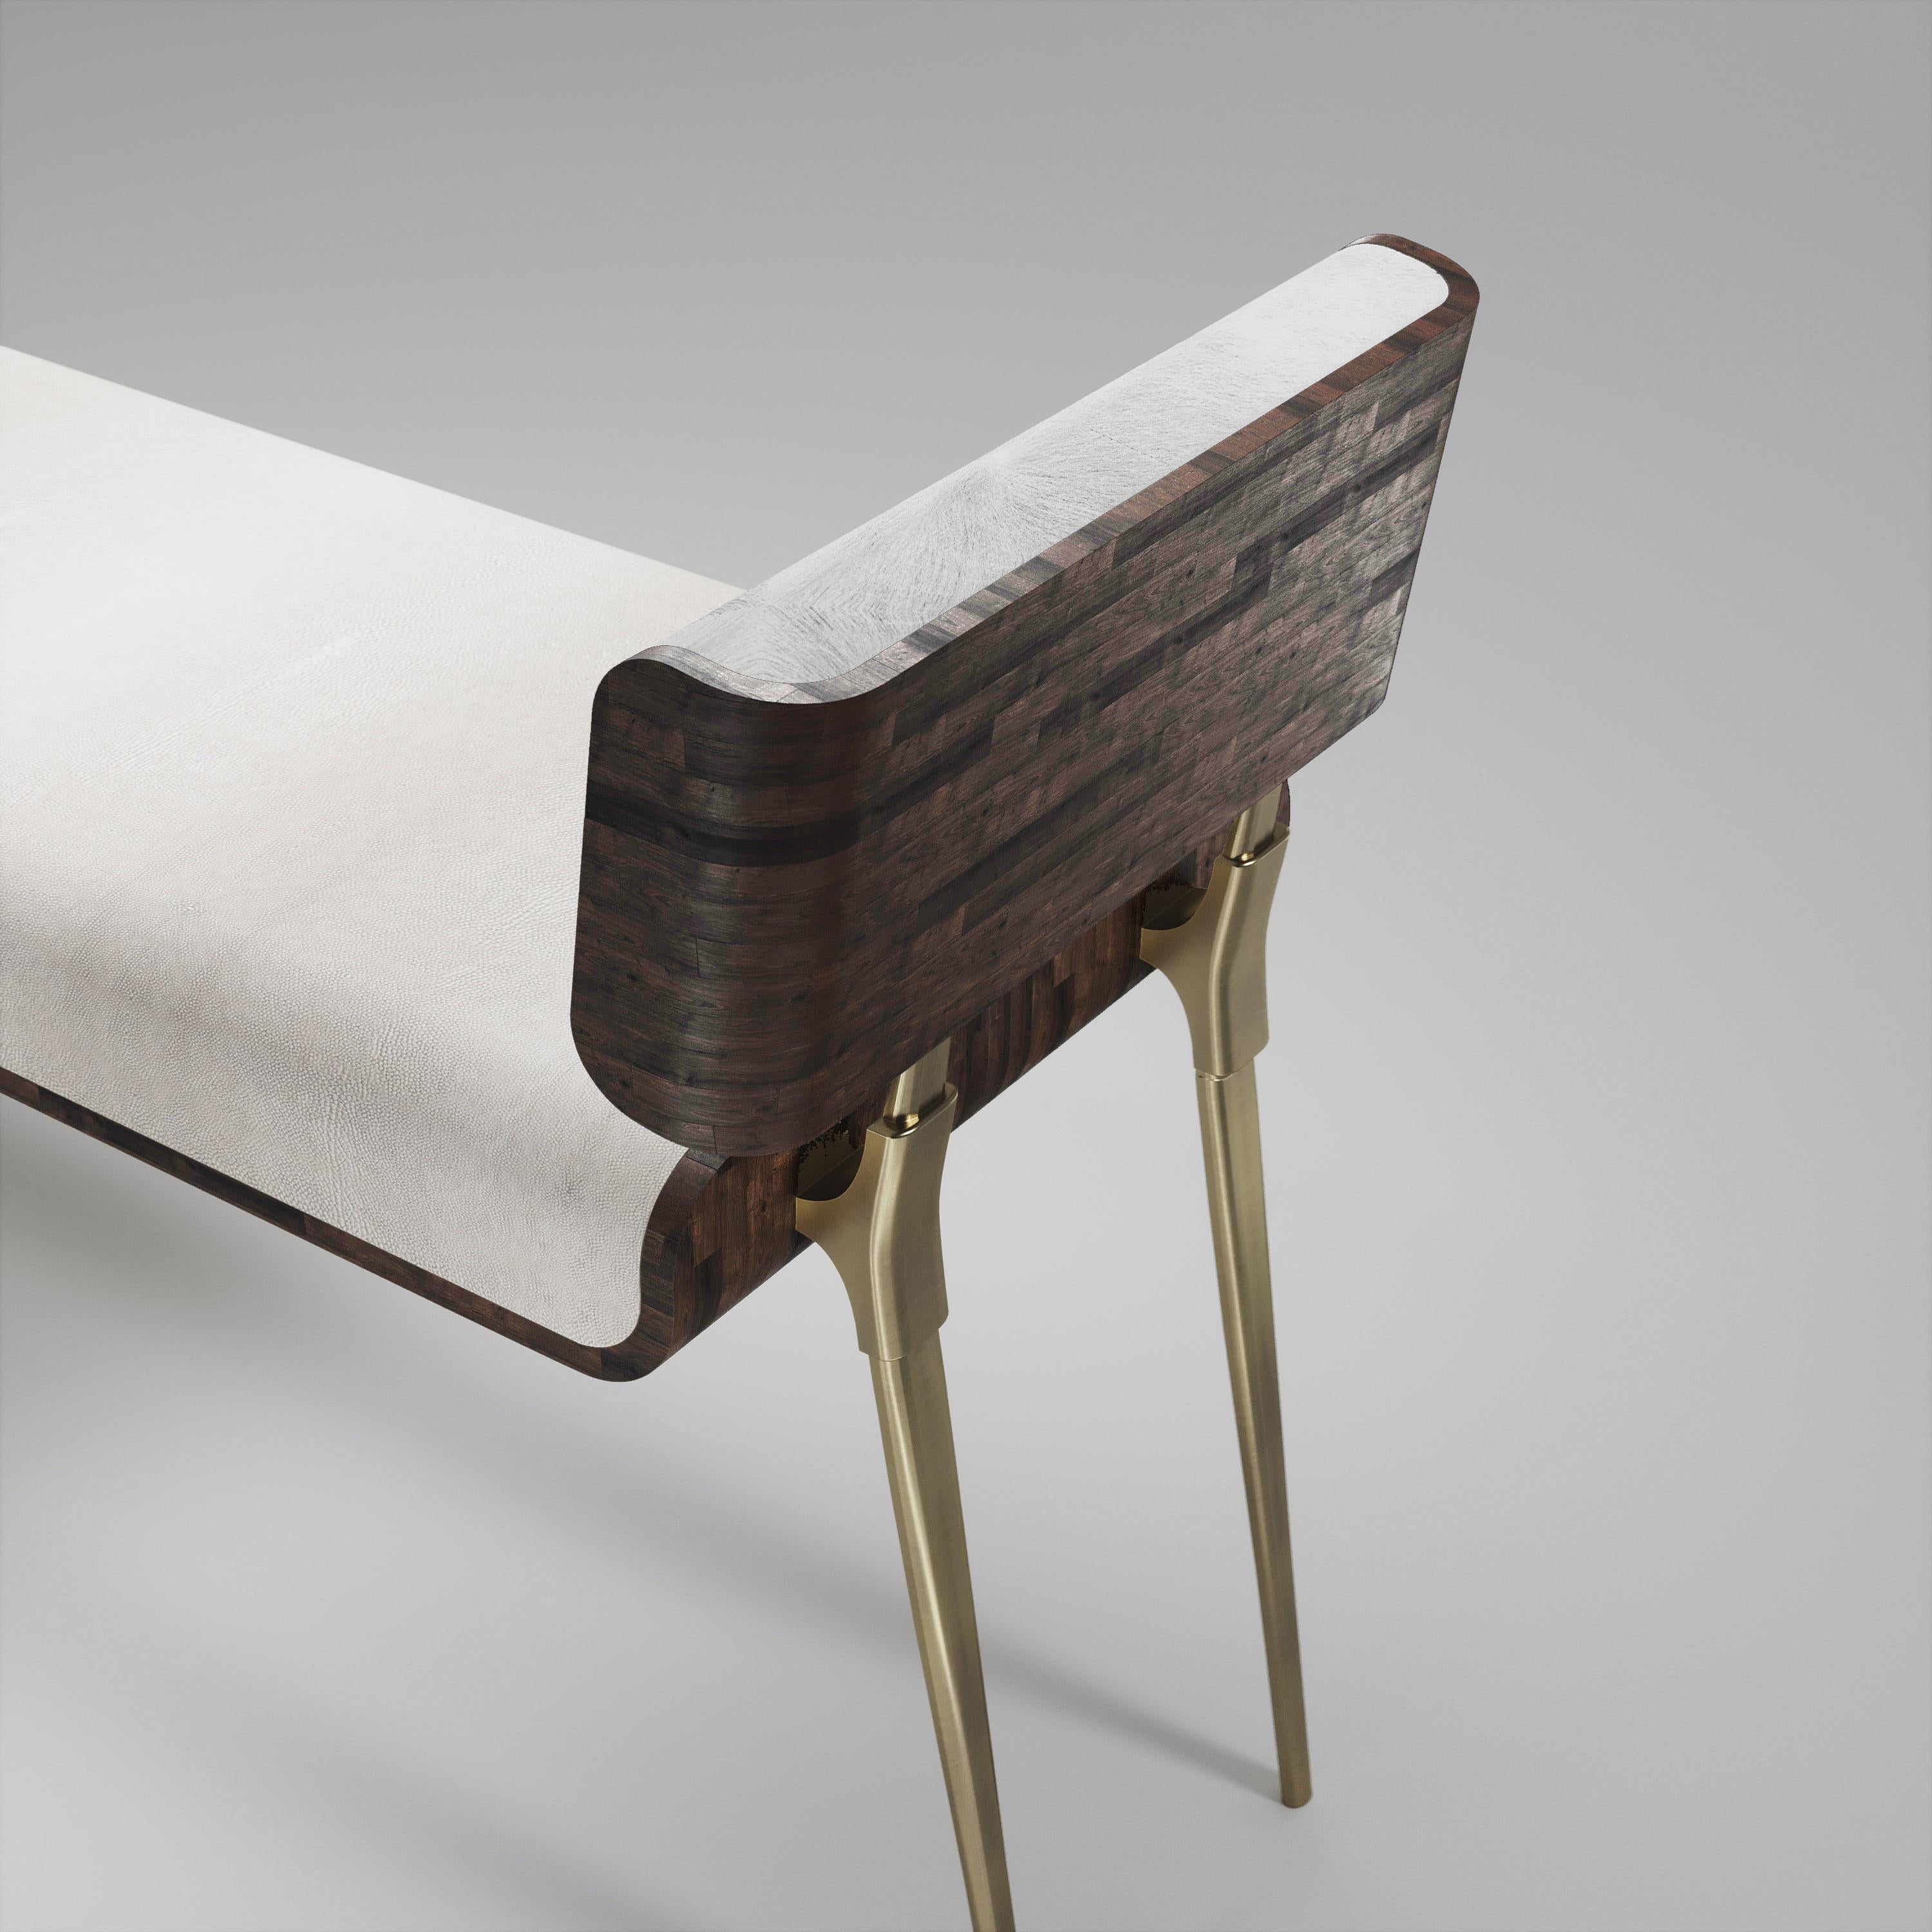 Inspired by the original Dandy Bench by Kifu Paris (see images at end of slide), the Dandy II Entrance Bench is the ultimate luxury seating. The seating area is inlaid in cream shagreen the frame and sides of the bench in Palmwood and the legs are